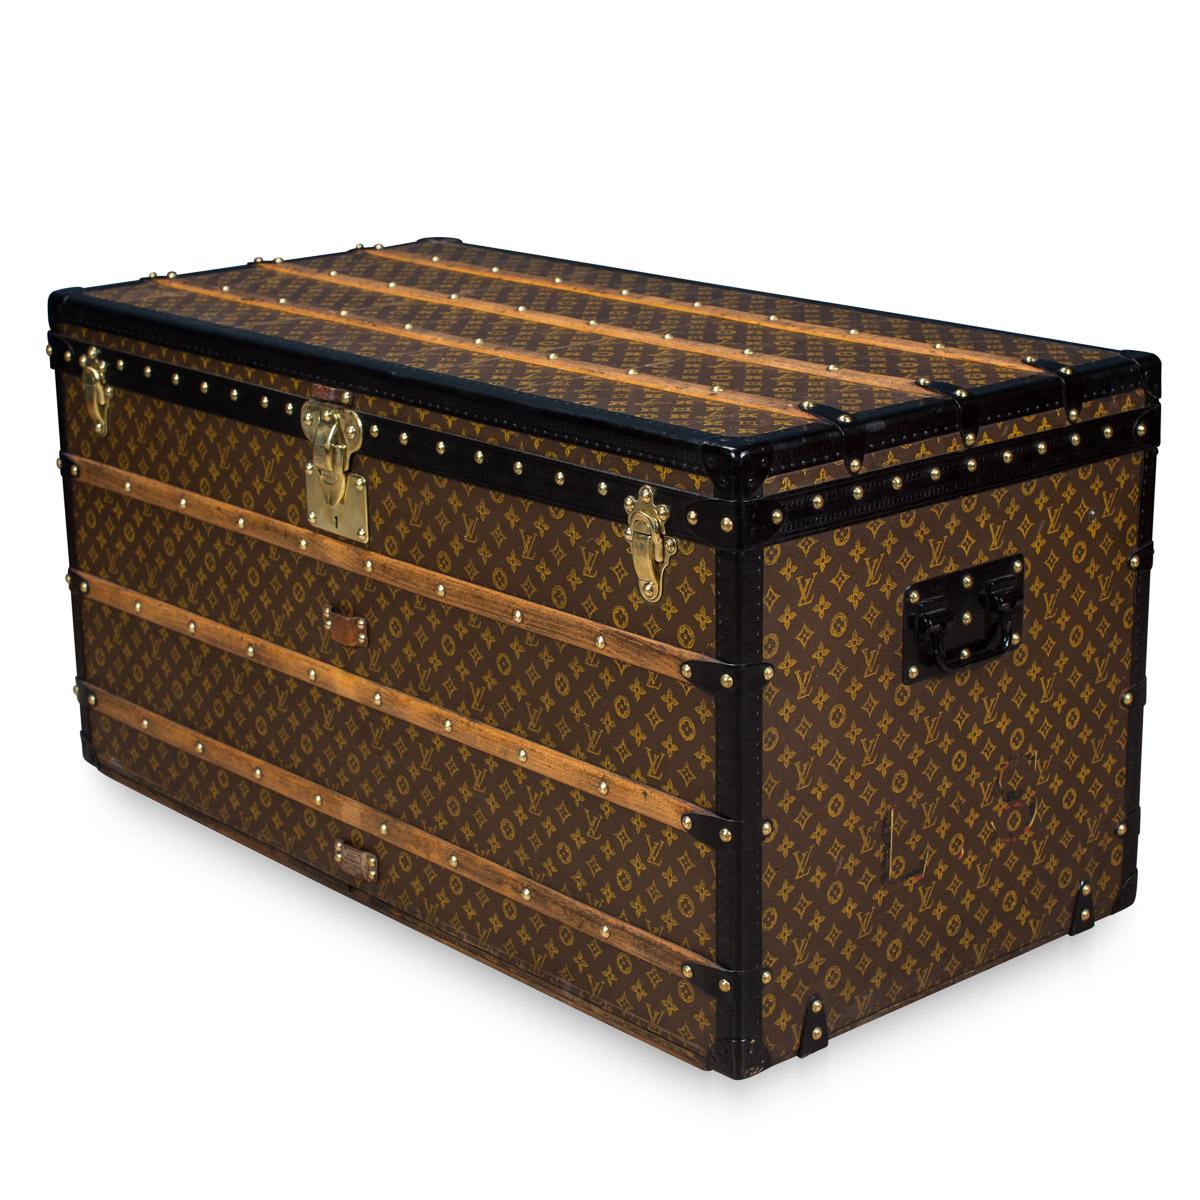 A superb example of an early 20th century Louis Vuitton trunk in the world famous monogrammed LV canvas. Complete with all its interior trays, this trunk is in exceptionally good condition and harks back to times of passenger ships and 1st class